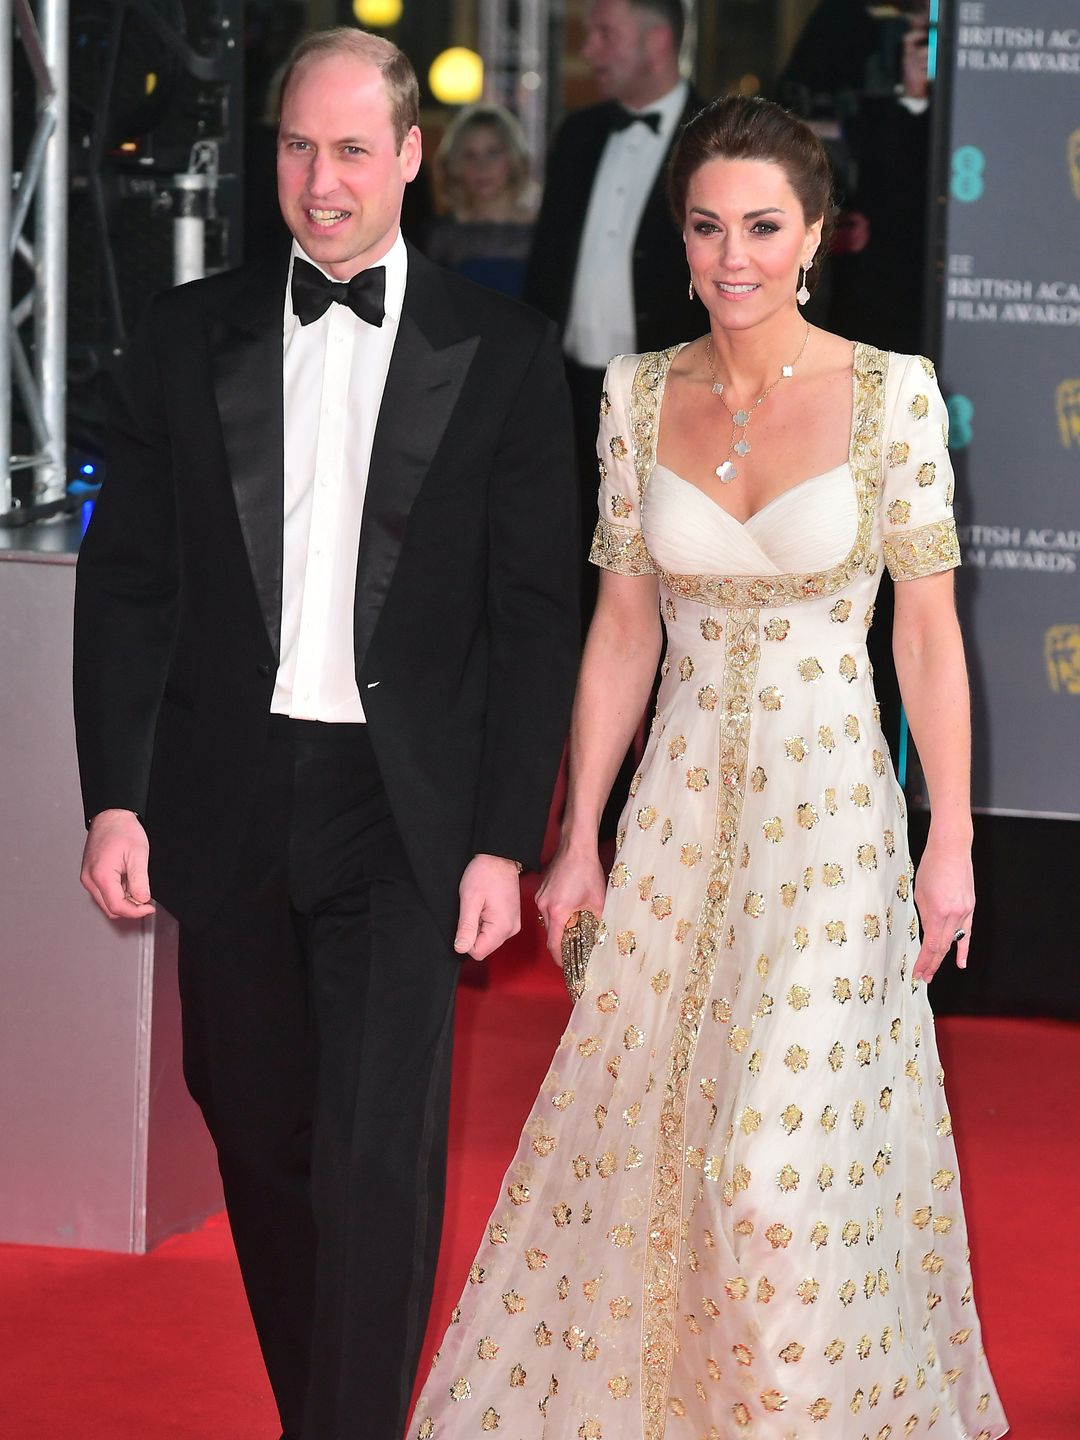 Prince William and Kate attend the EE British Academy Film Awards 2020 at Royal Albert Hall 